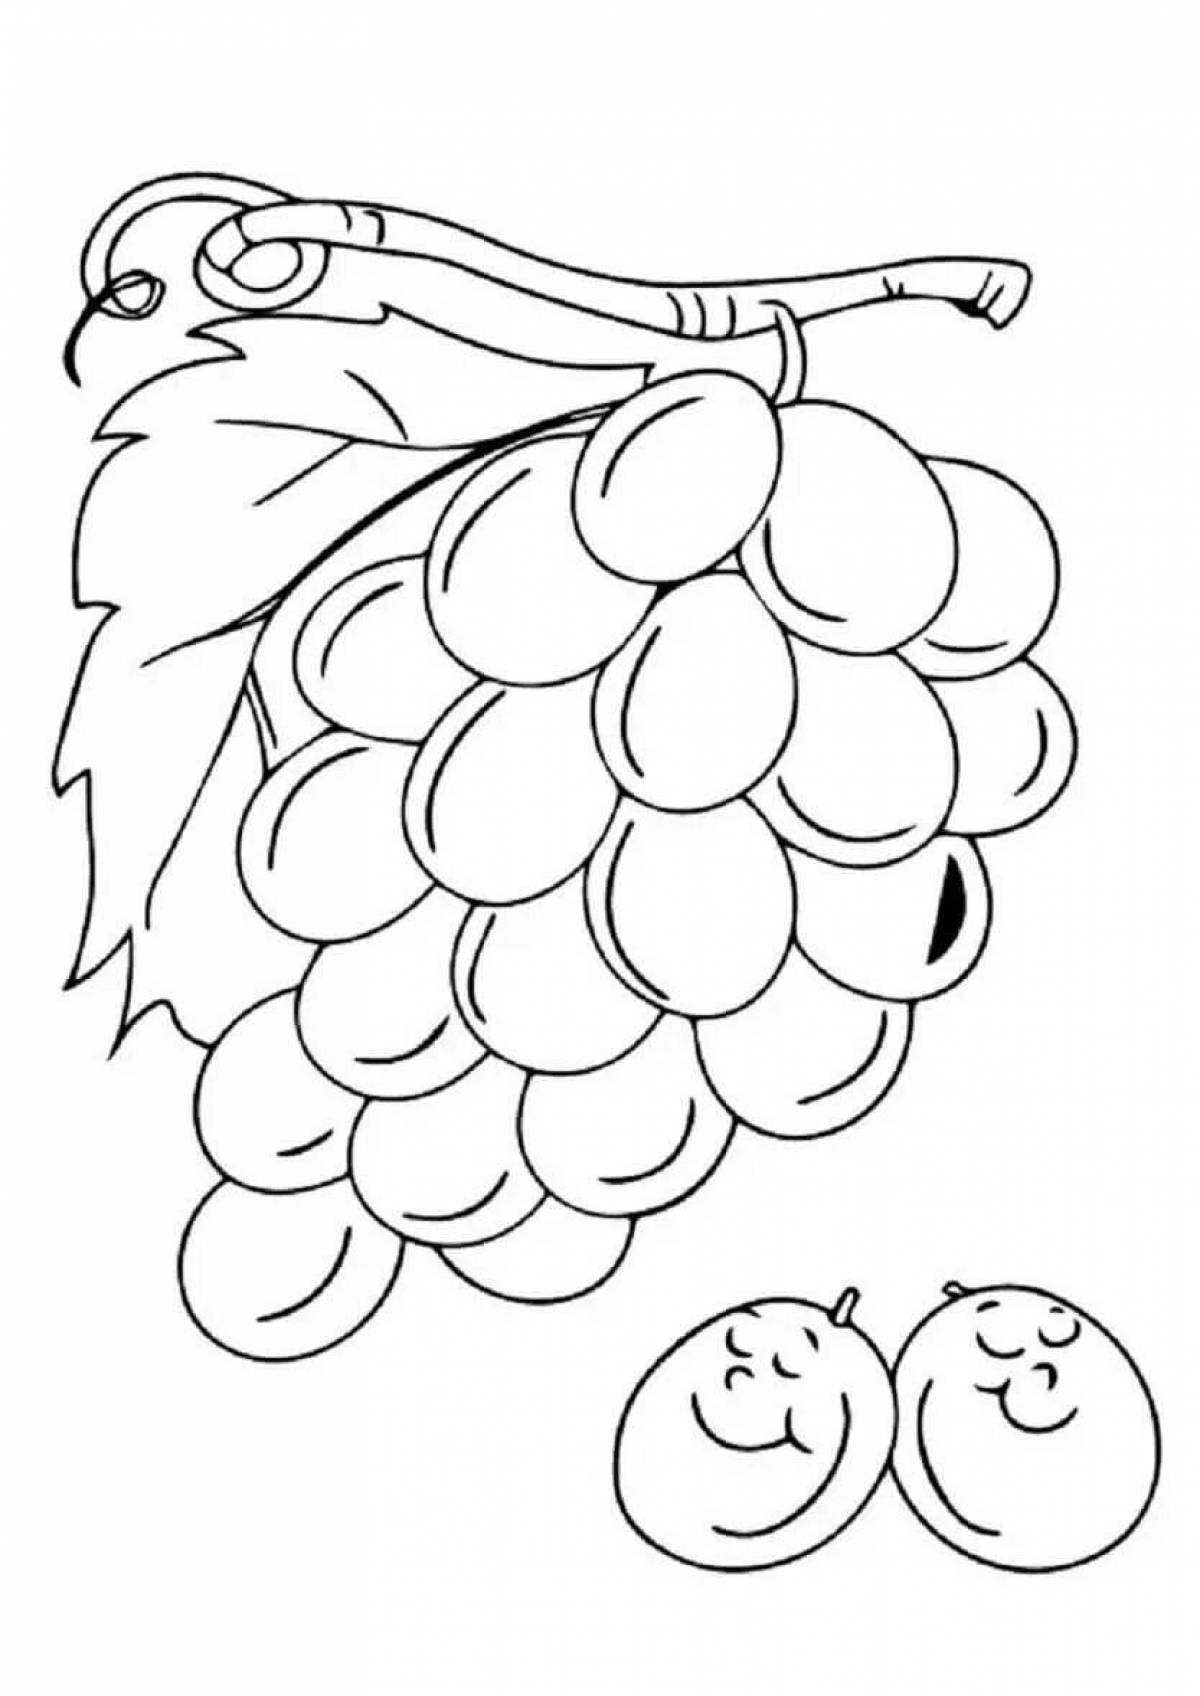 Amazing grape coloring pages for 5-6 year olds